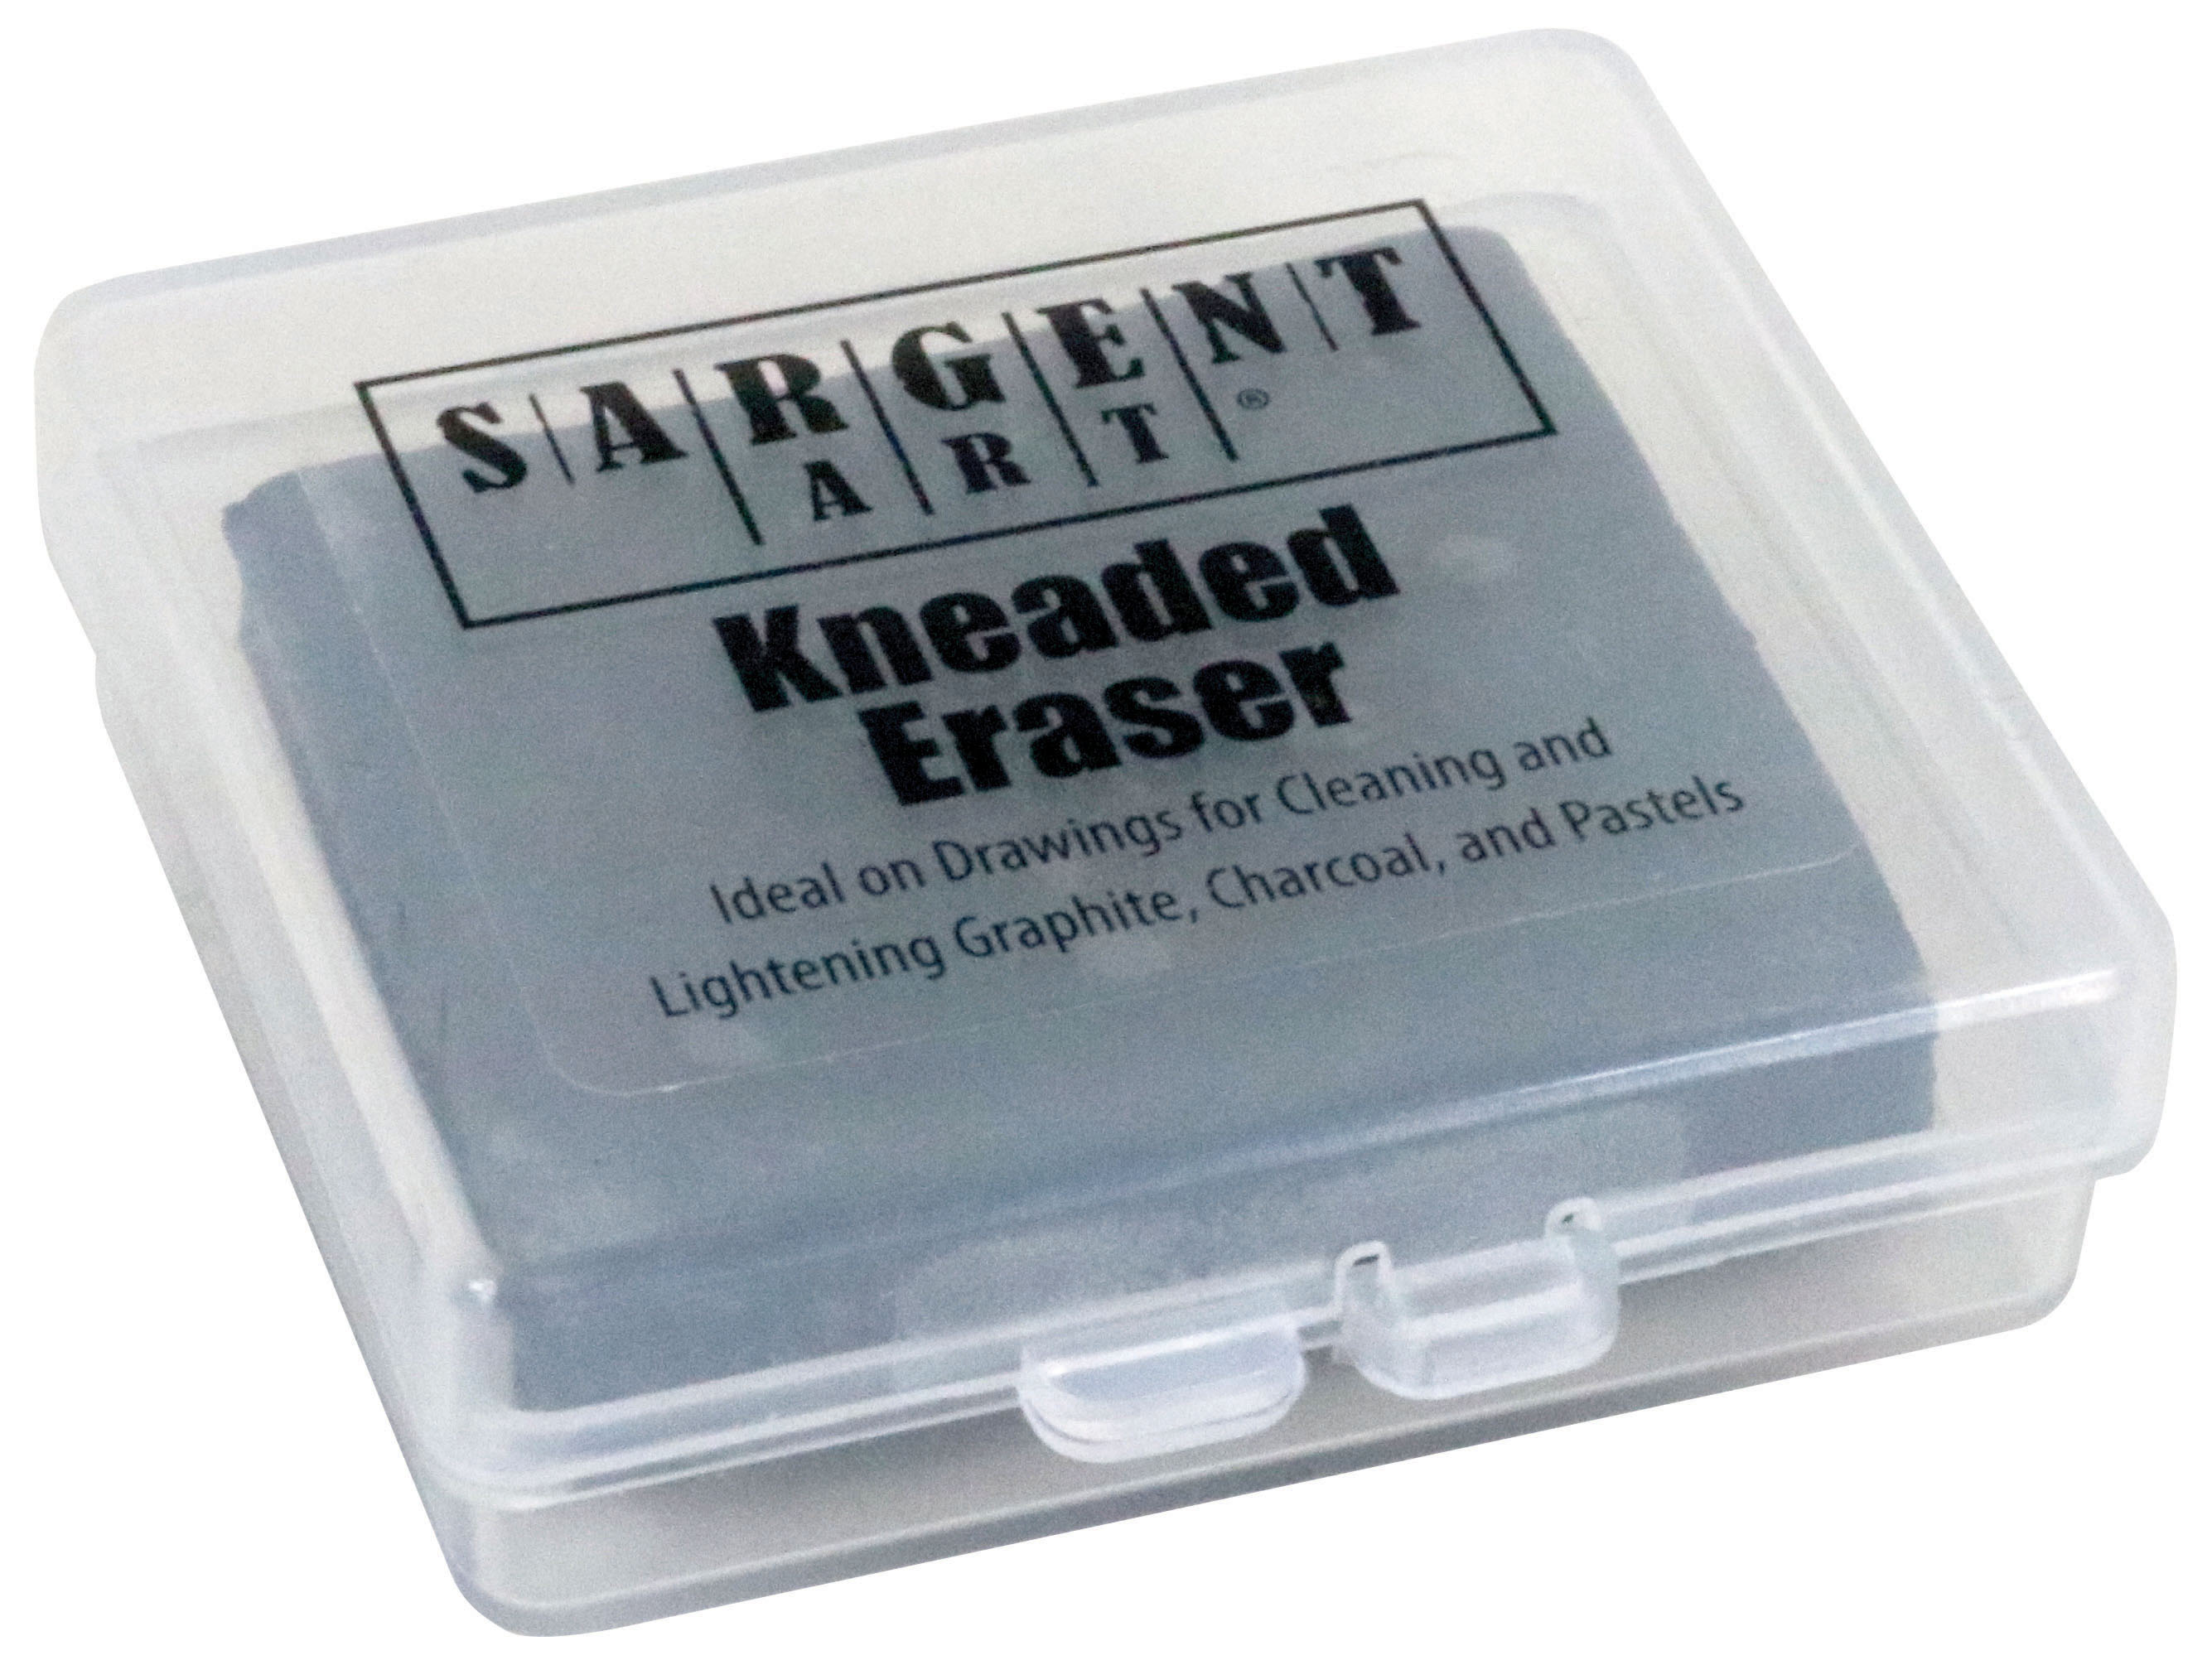 Sargent Art White Vinyl Erasers, 20-Pack - Midwest Technology Products